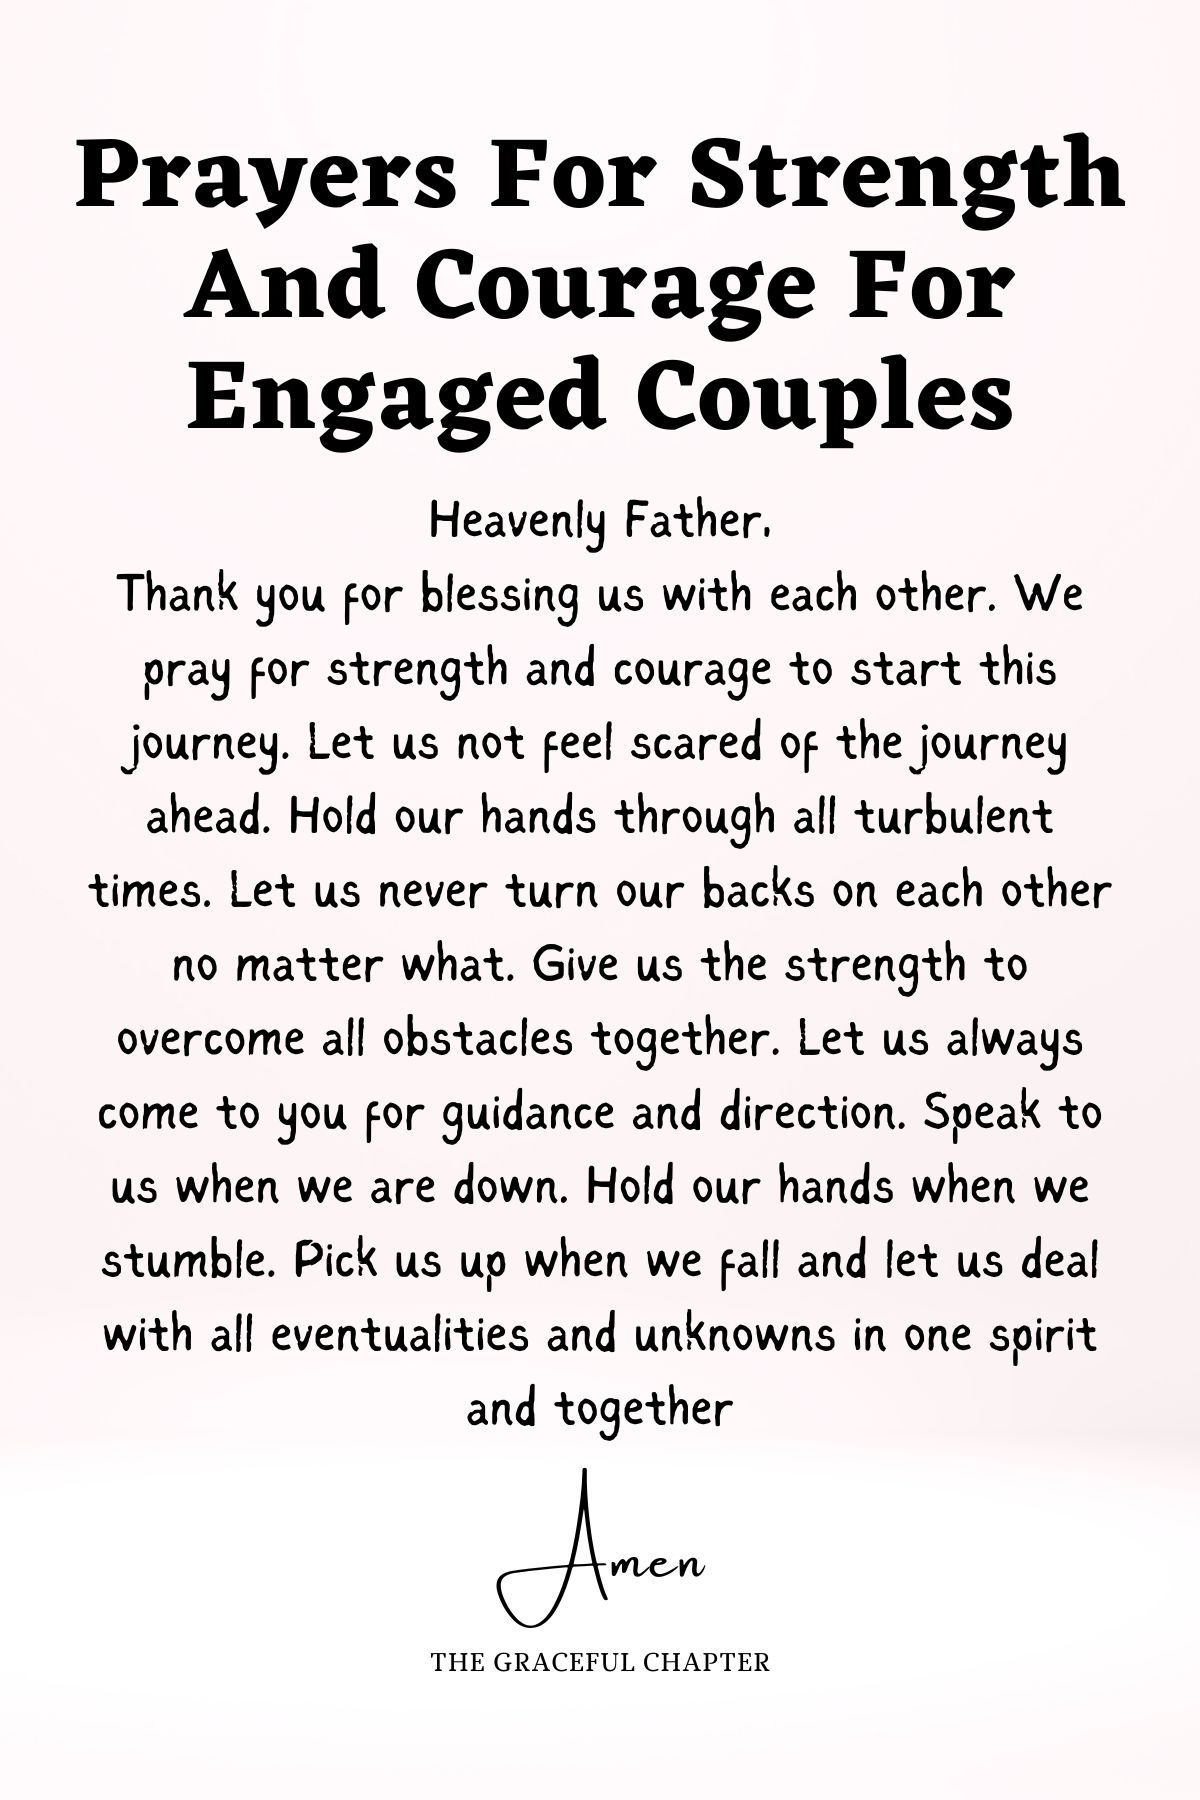 Prayer for strength and courage for engage couples